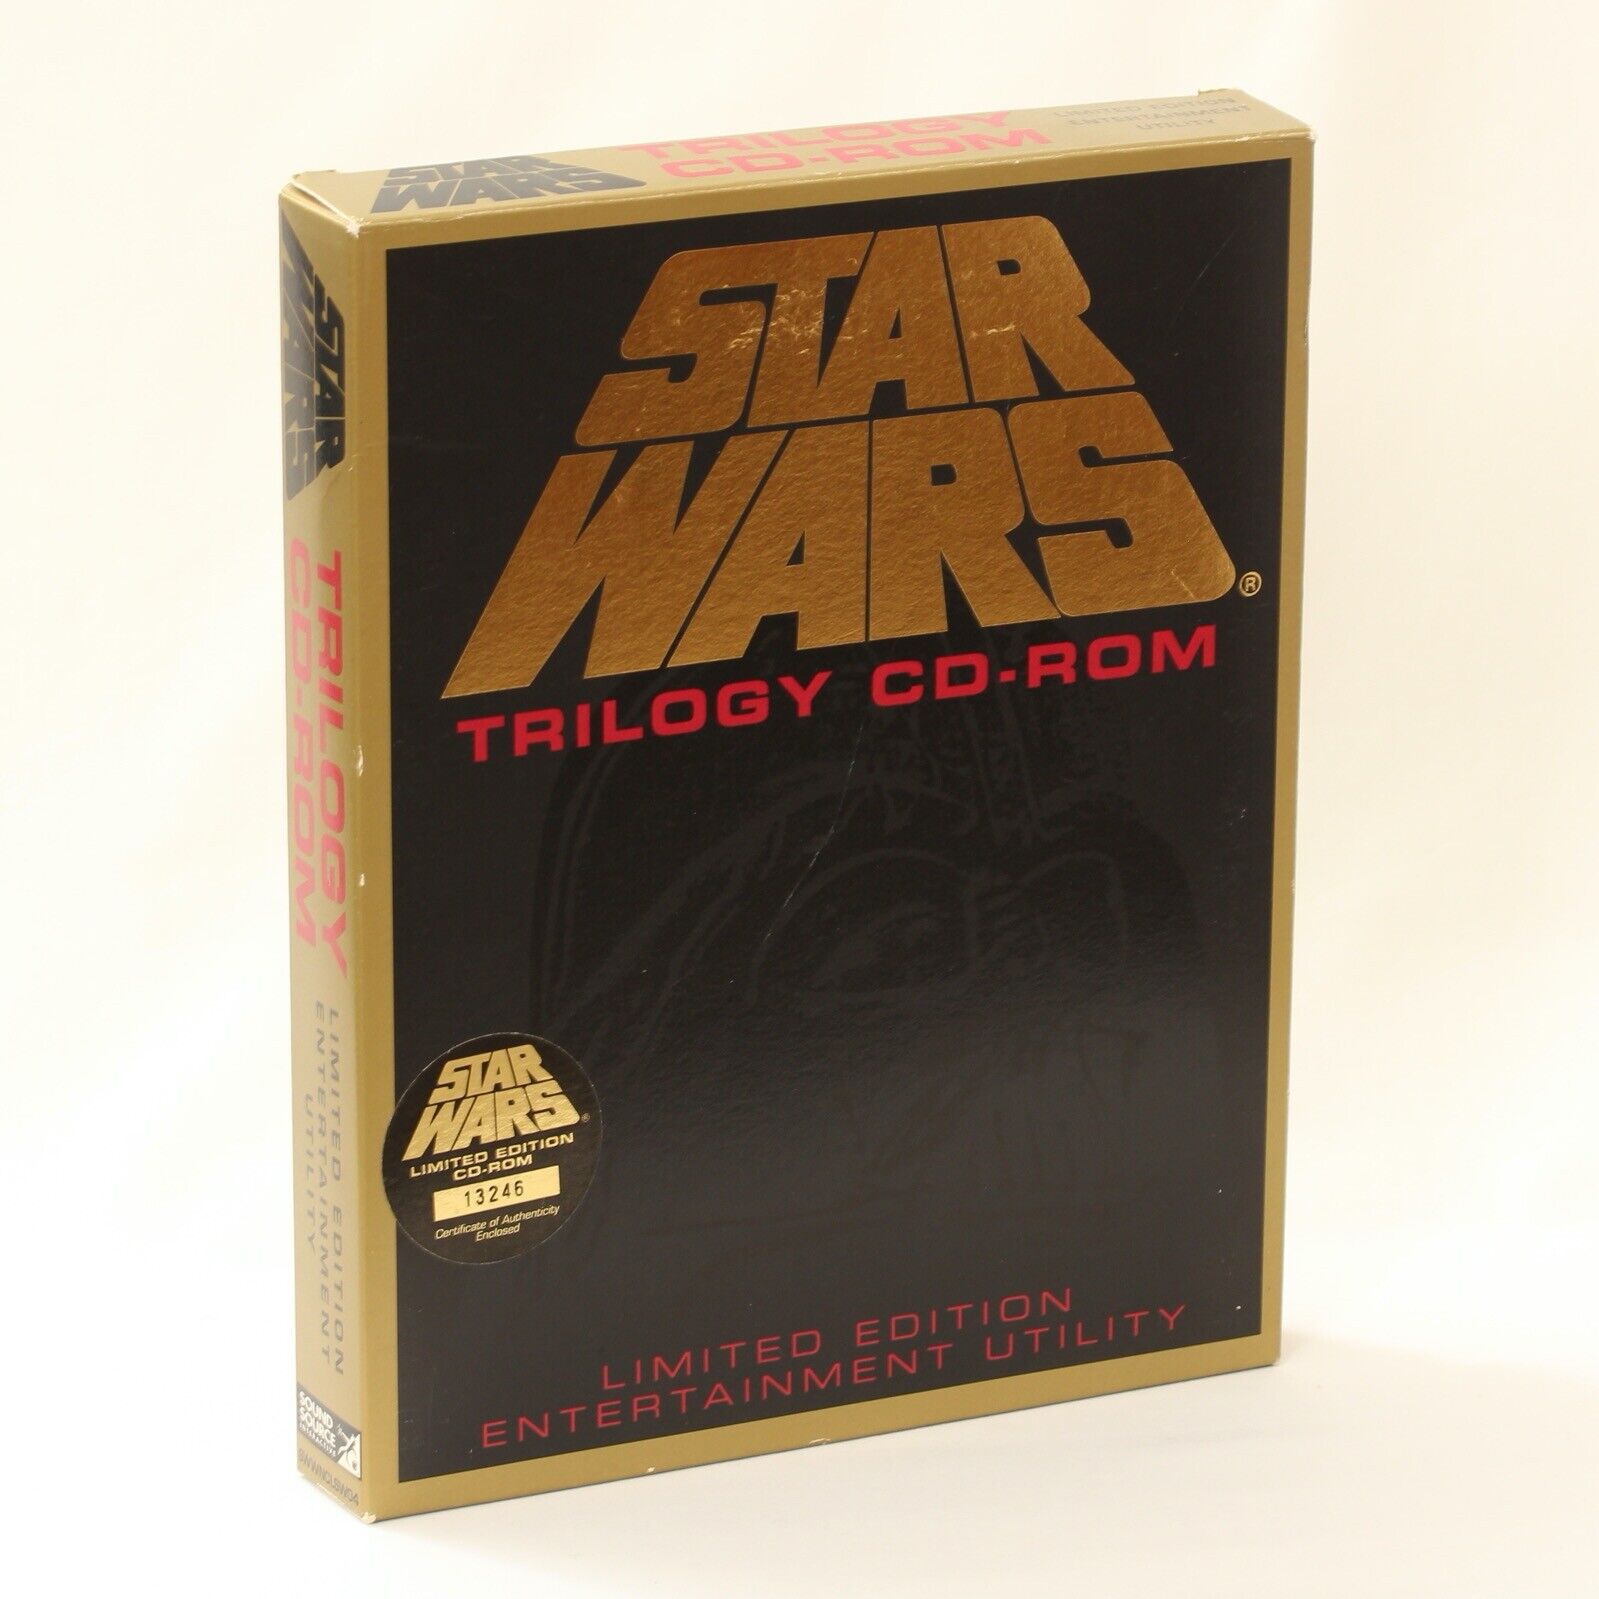 Star Wars Trilogy (Limited Edition) CD-ROM Vintage BIG BOX Game for PC from 1995